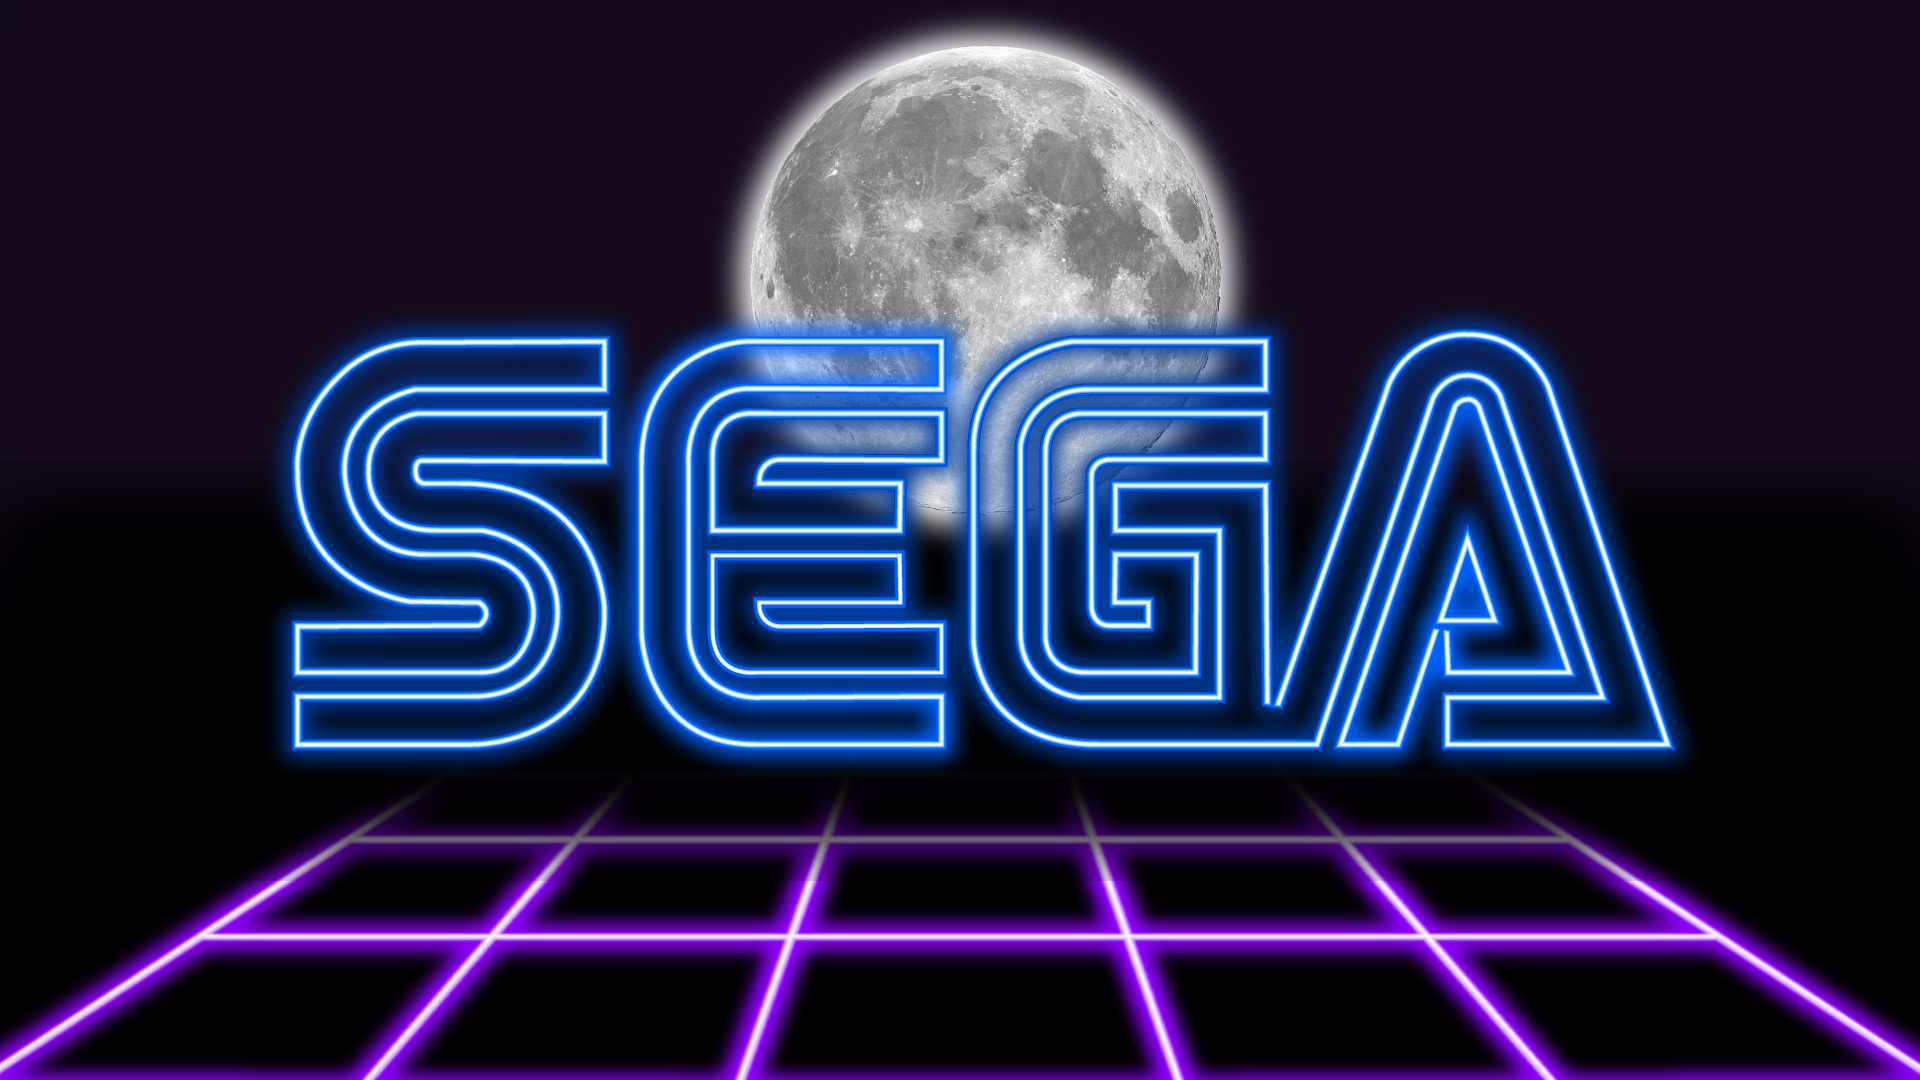 I made some Sega Console wallpaper, you can use them if you like